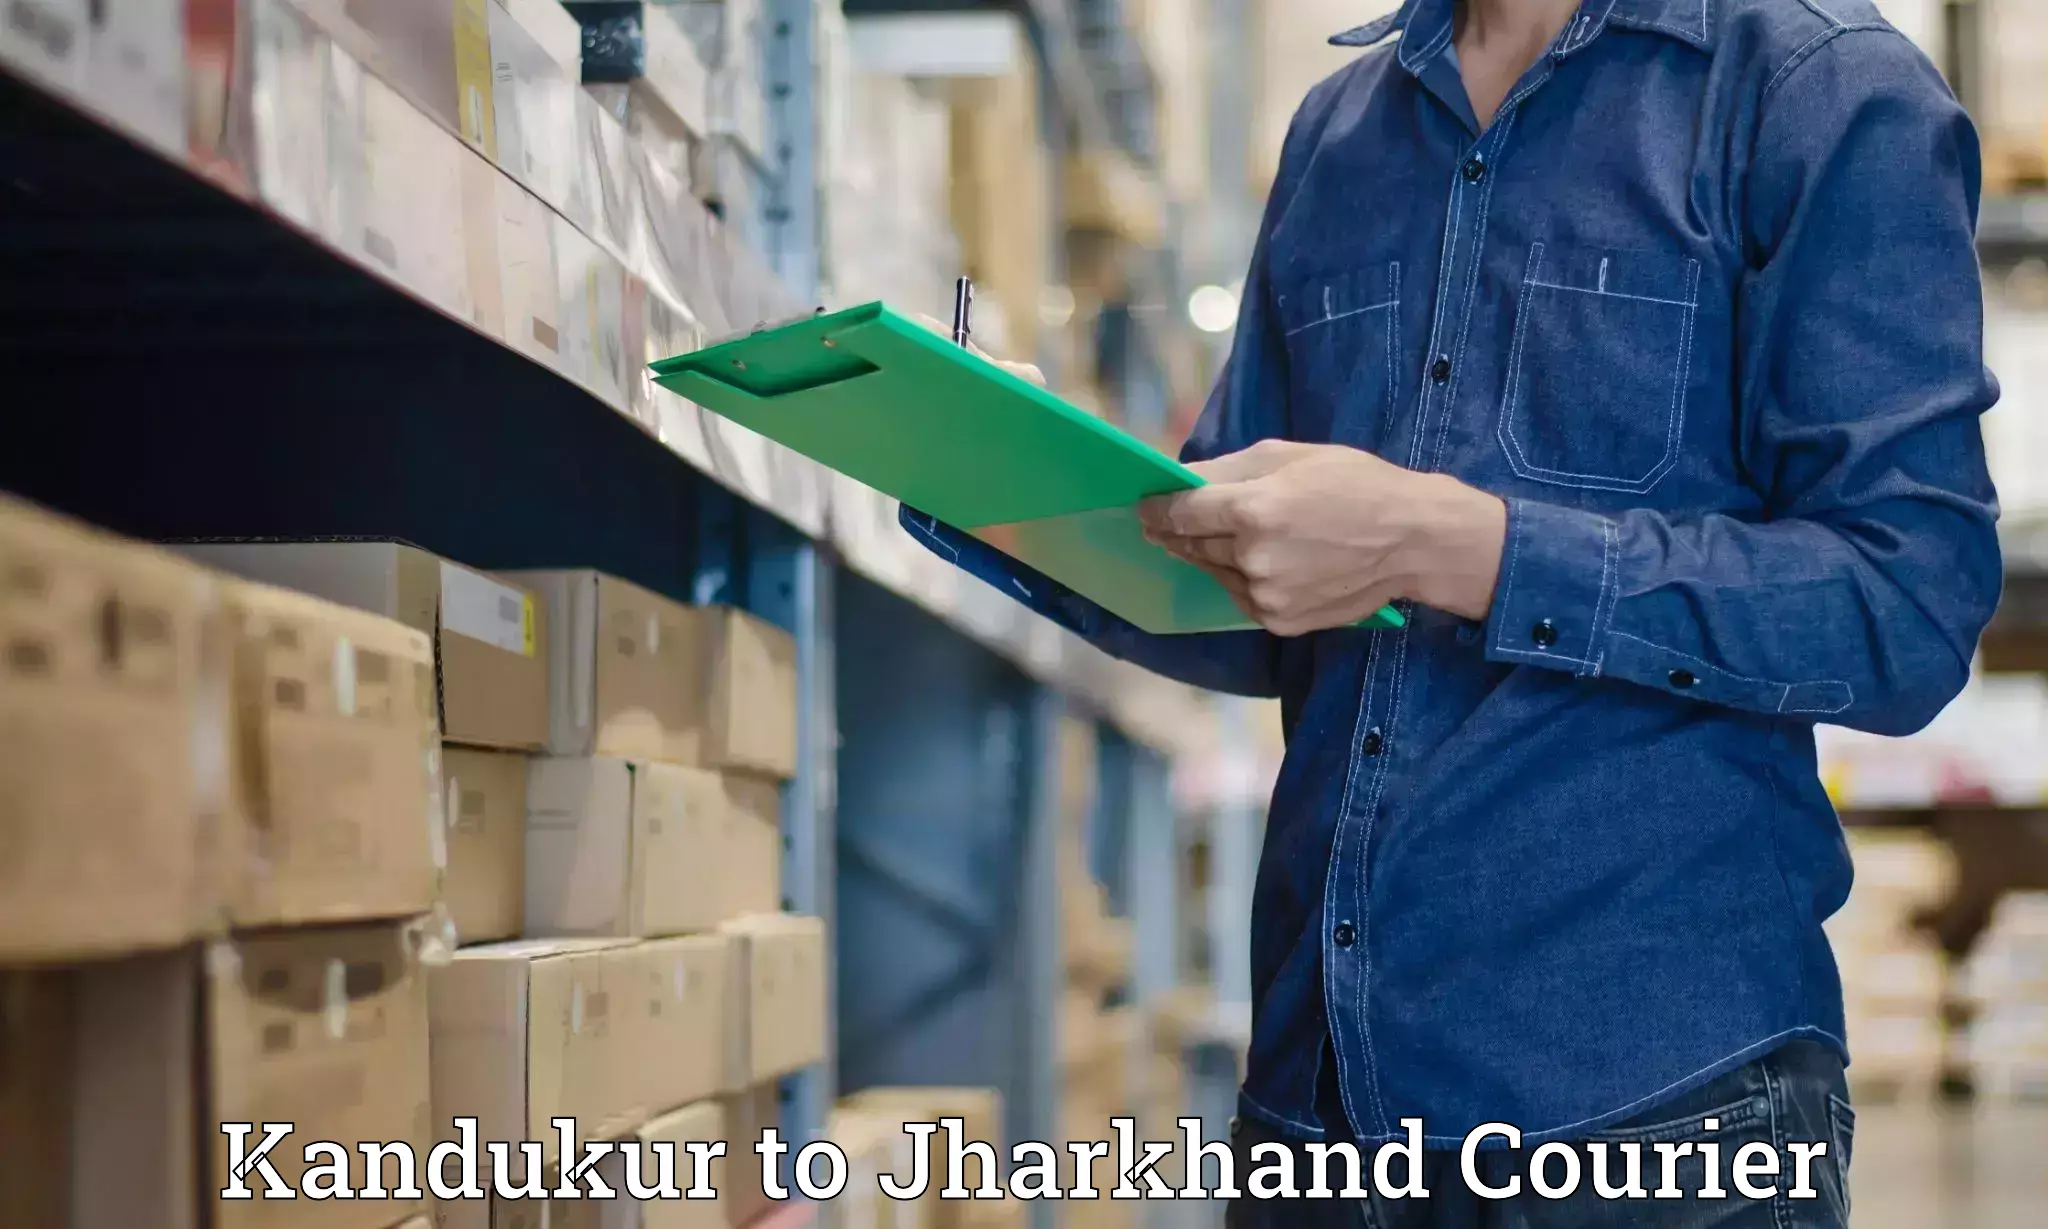 Cash on delivery service Kandukur to Topchanchi